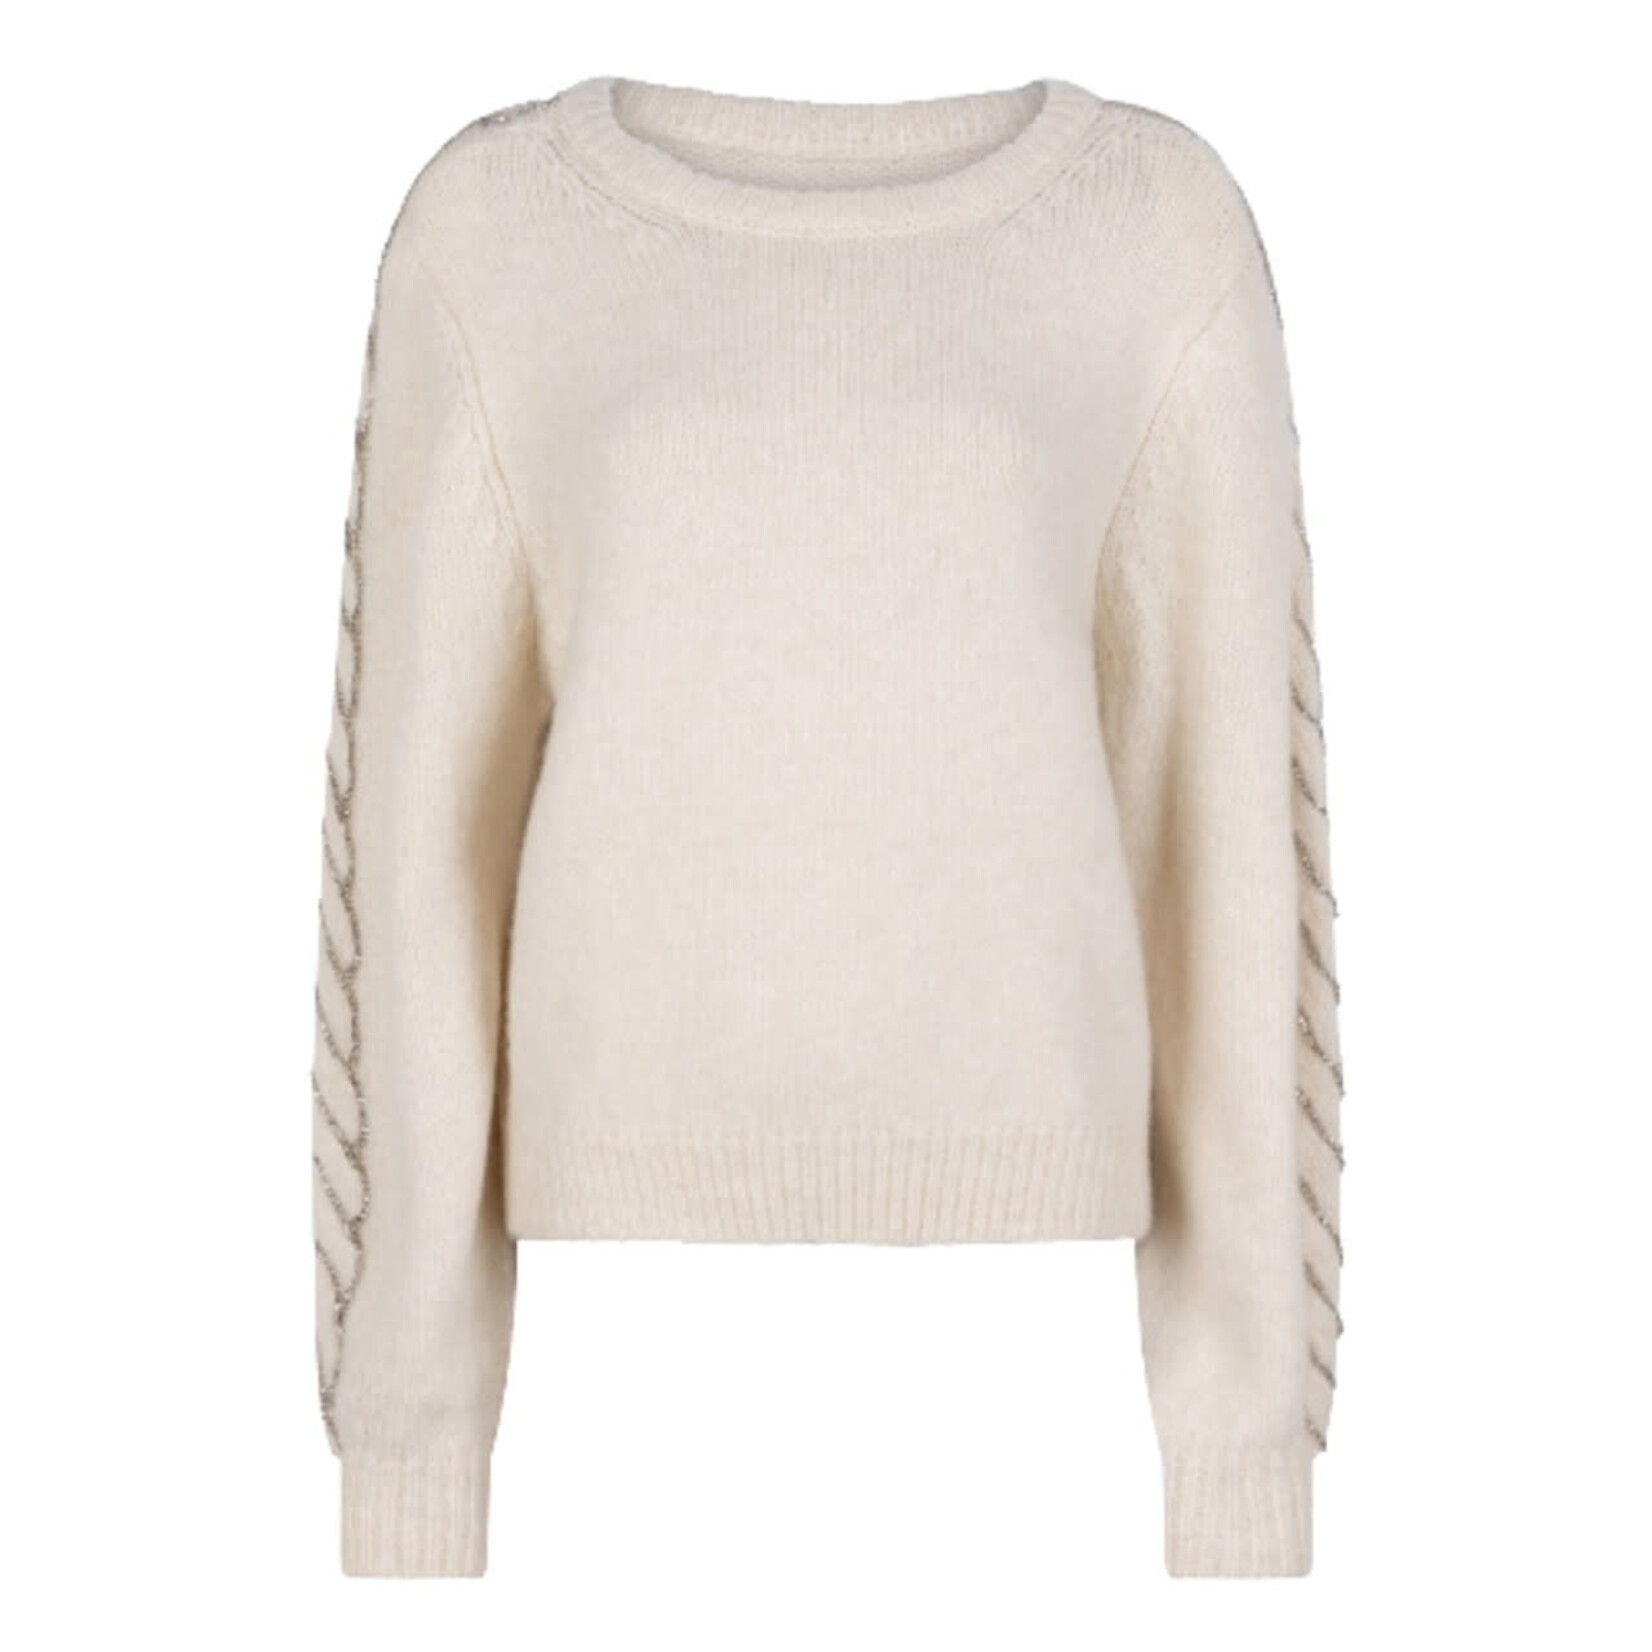 DIAMOND CHAIN SWEATER - Southern Accents MS